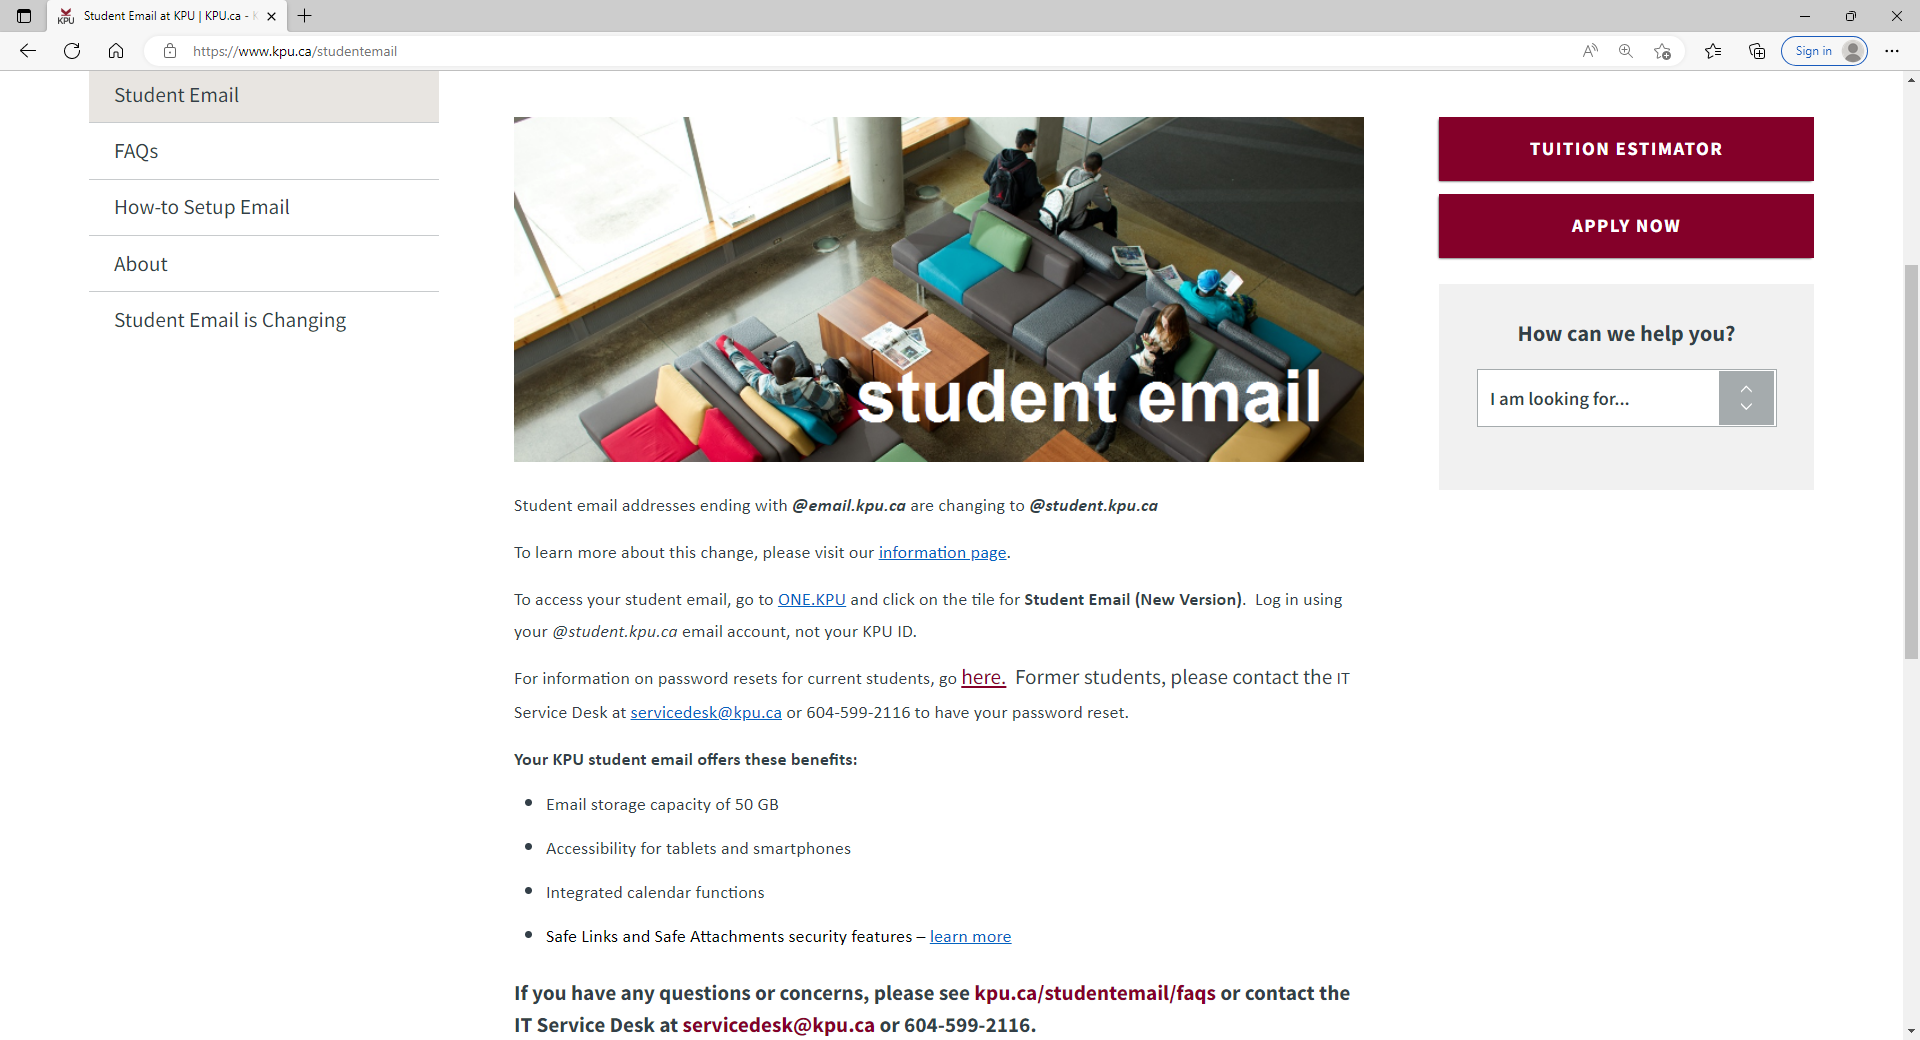 Student email